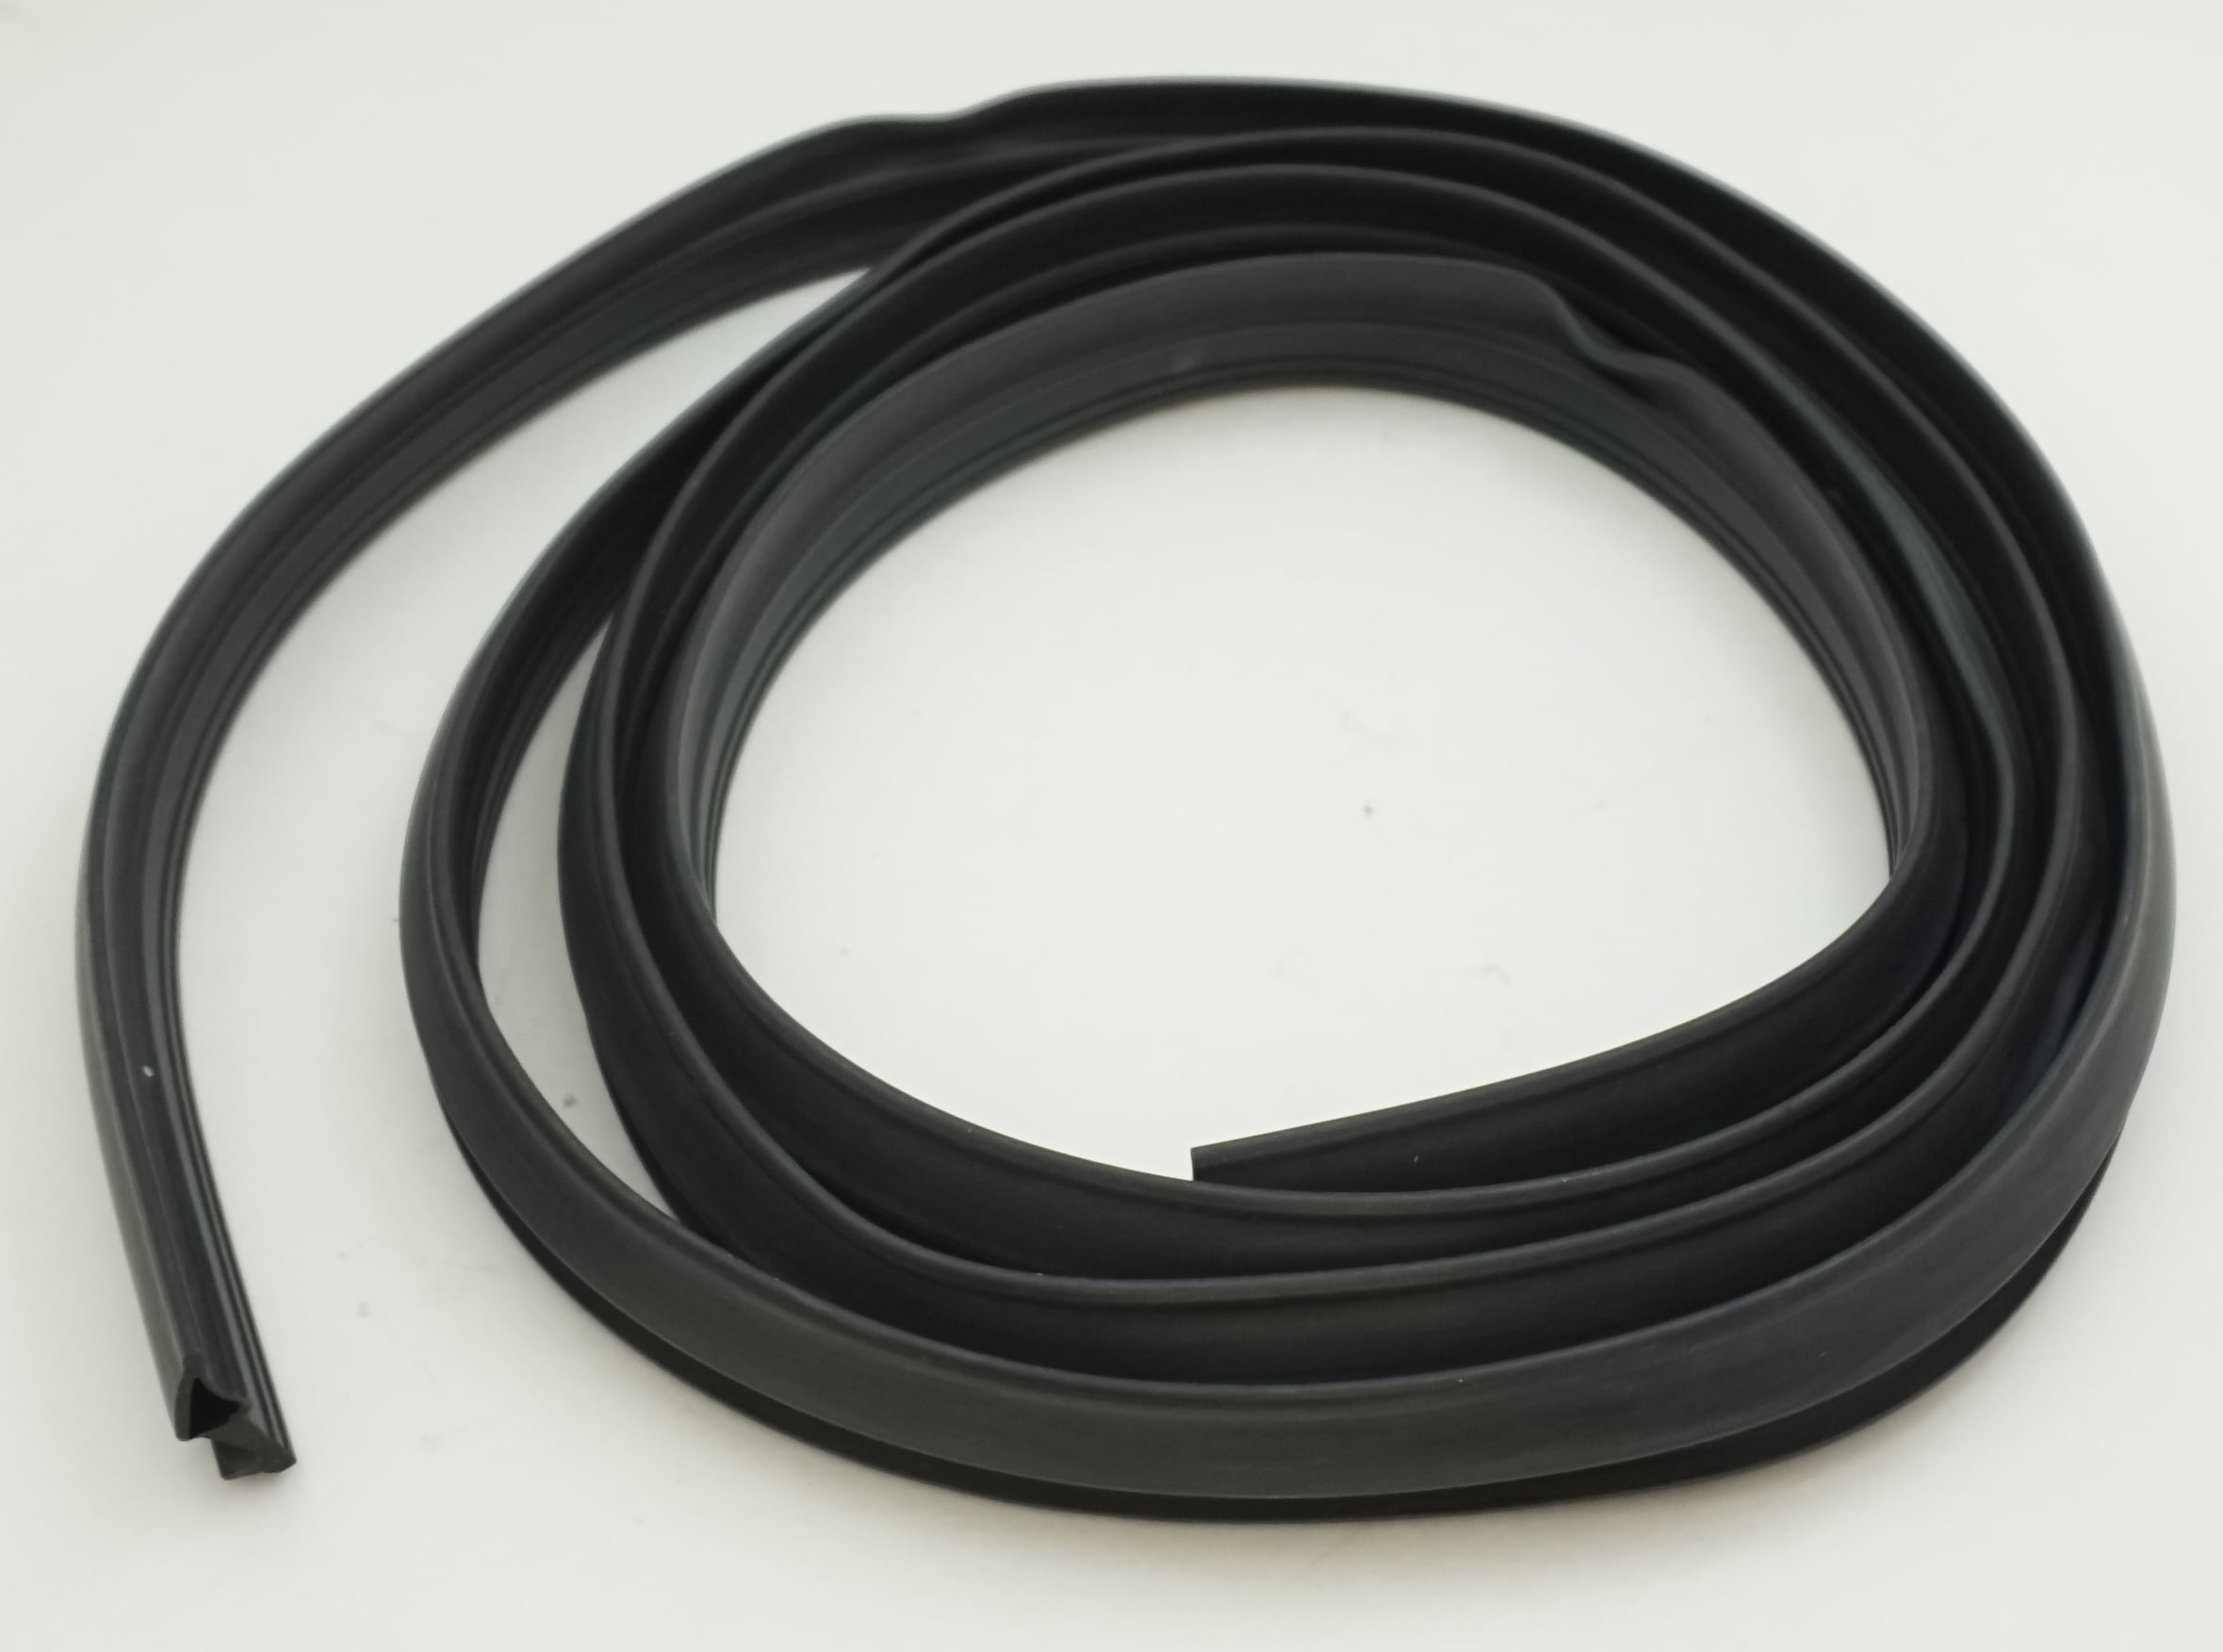 Upgraded W11177741 Dishwasher Gasket Door Seal by AMI Compatible with Whirlpool Kenmore Dishwashers replaces W10300924 at MechanicSurplus.com